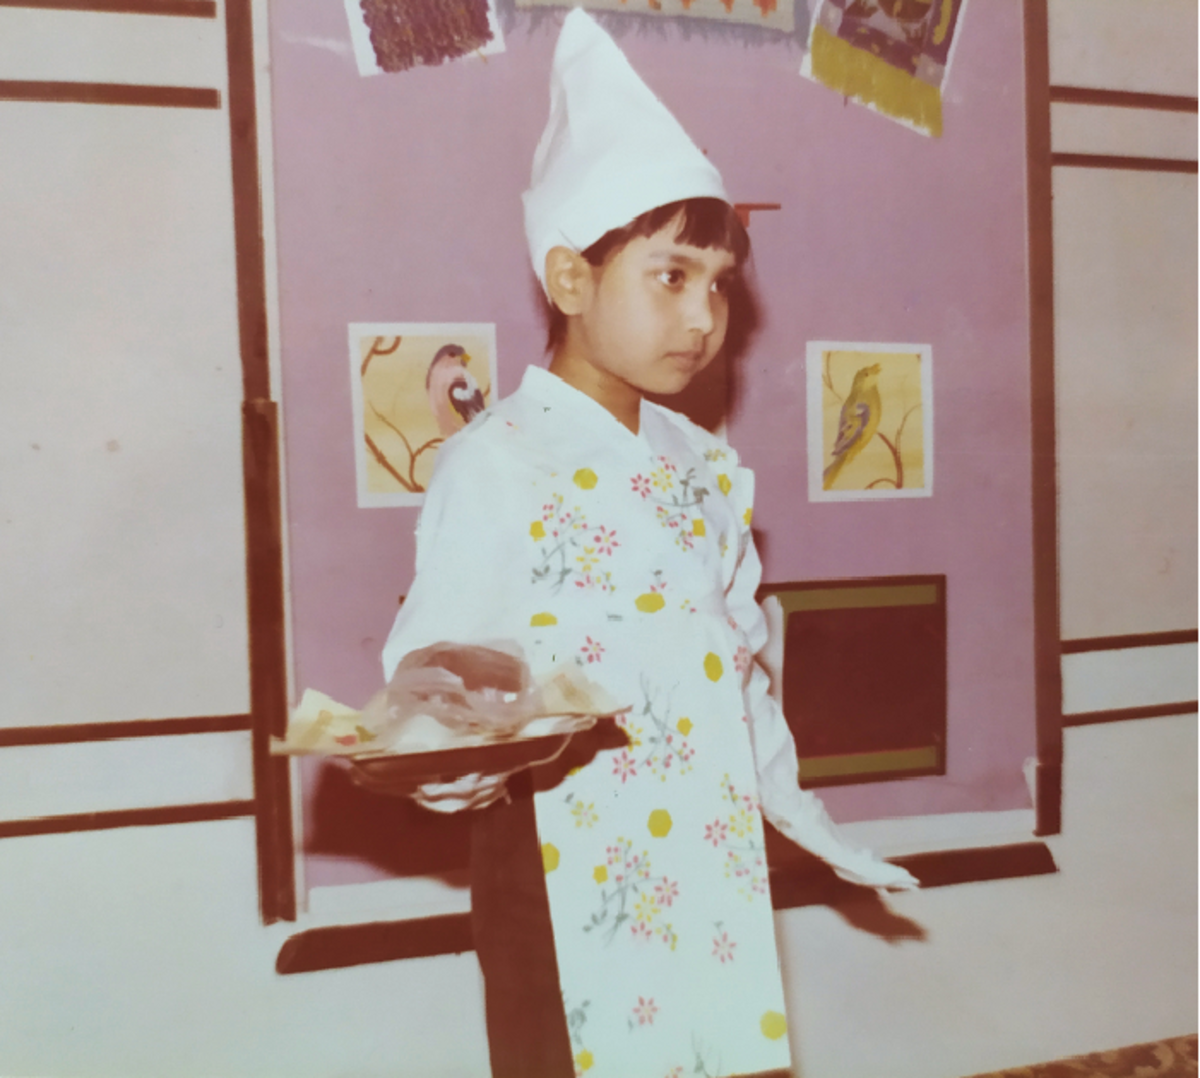 Pic: Me, as a Baker, Participating in “The Grumbler” Play